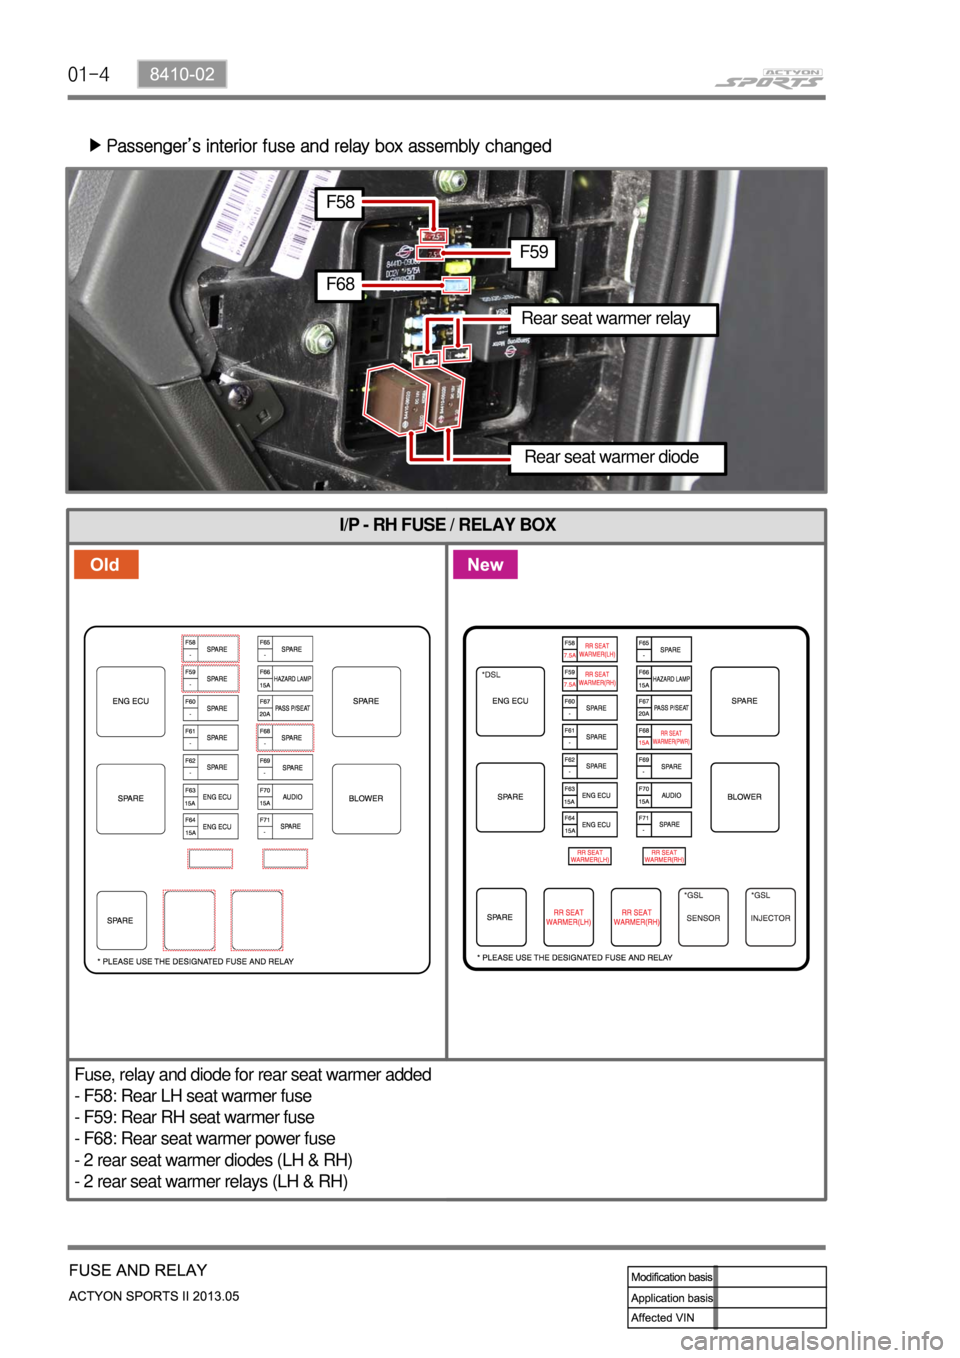 SSANGYONG NEW ACTYON SPORTS 2013  Service Manual 01-4
Passenger’s interior fuse and relay box assembly changed ▶
I/P - RH FUSE / RELAY BOX
Fuse, relay and diode for rear seat warmer added
- F58: Rear LH seat warmer fuse
- F59: Rear RH seat warme